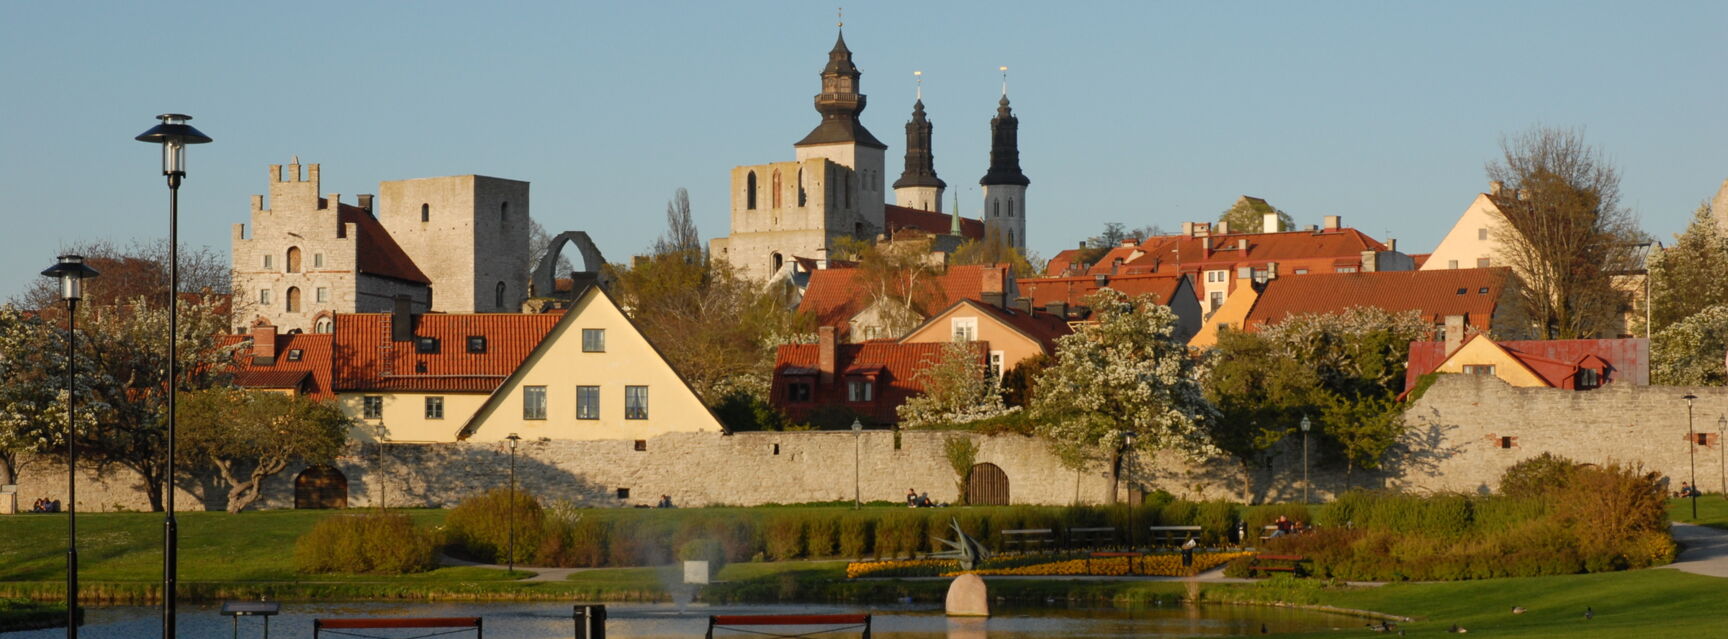 Main picture Visby ©Region Gotland